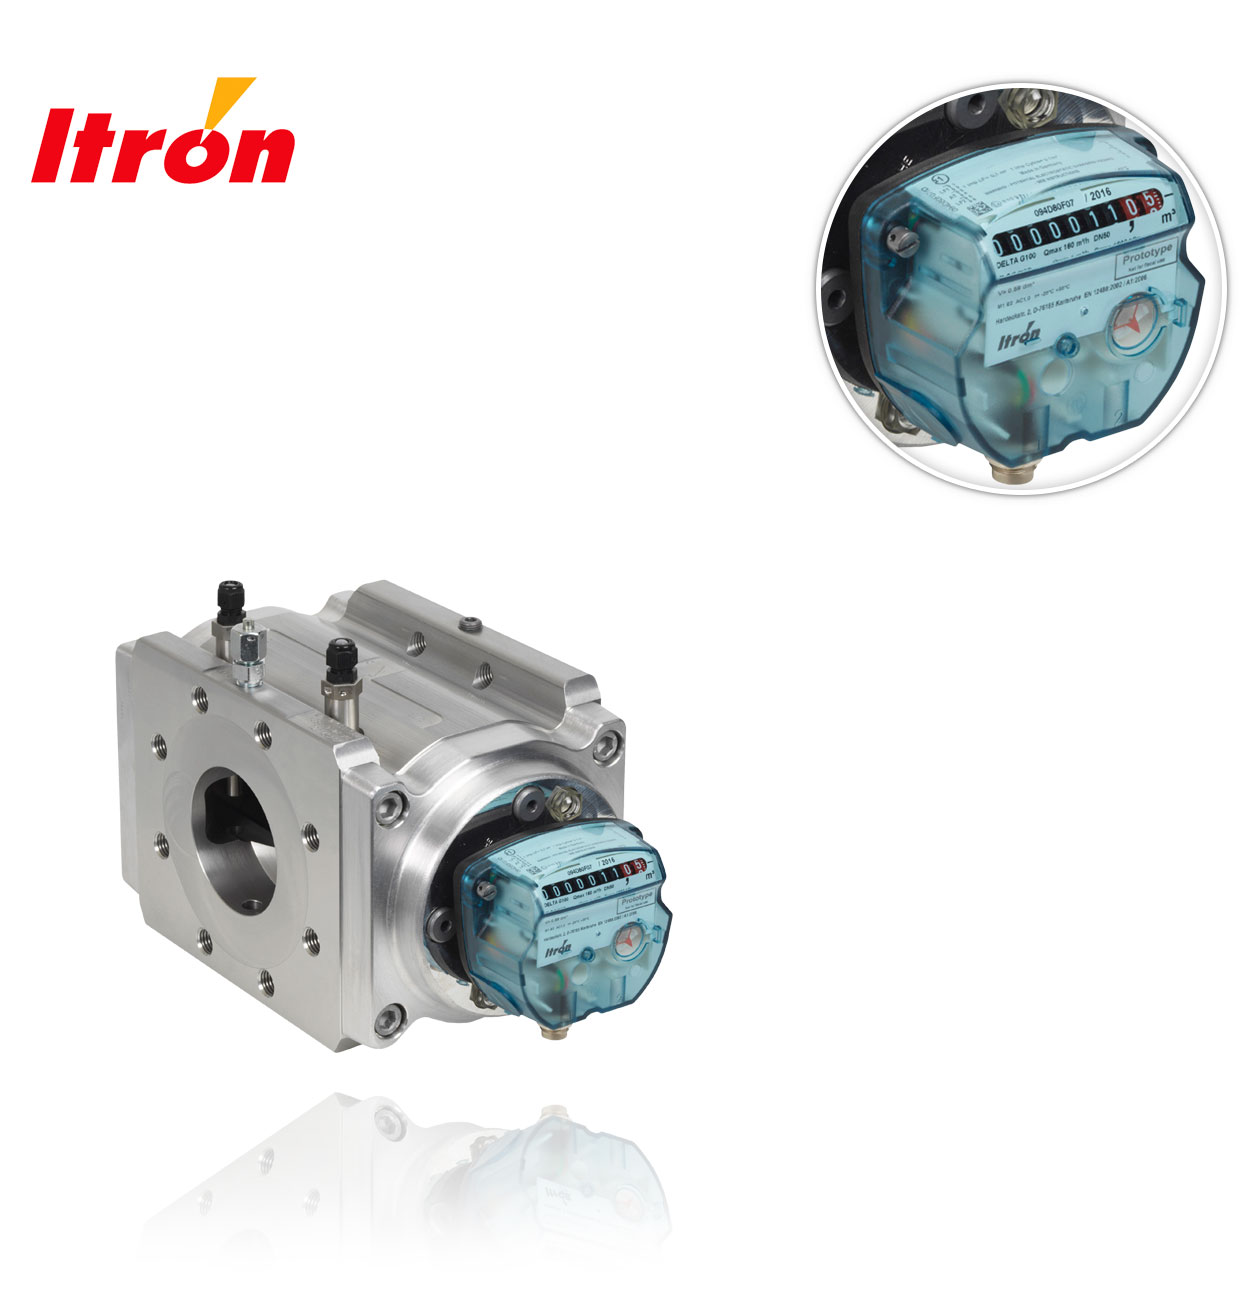 DELTA G400 DN100 maximum qty:650 DYNAMIC:160 LENGTH:241mm ITRON EXTENDED DYNAMIC ROTARY PISTON METER